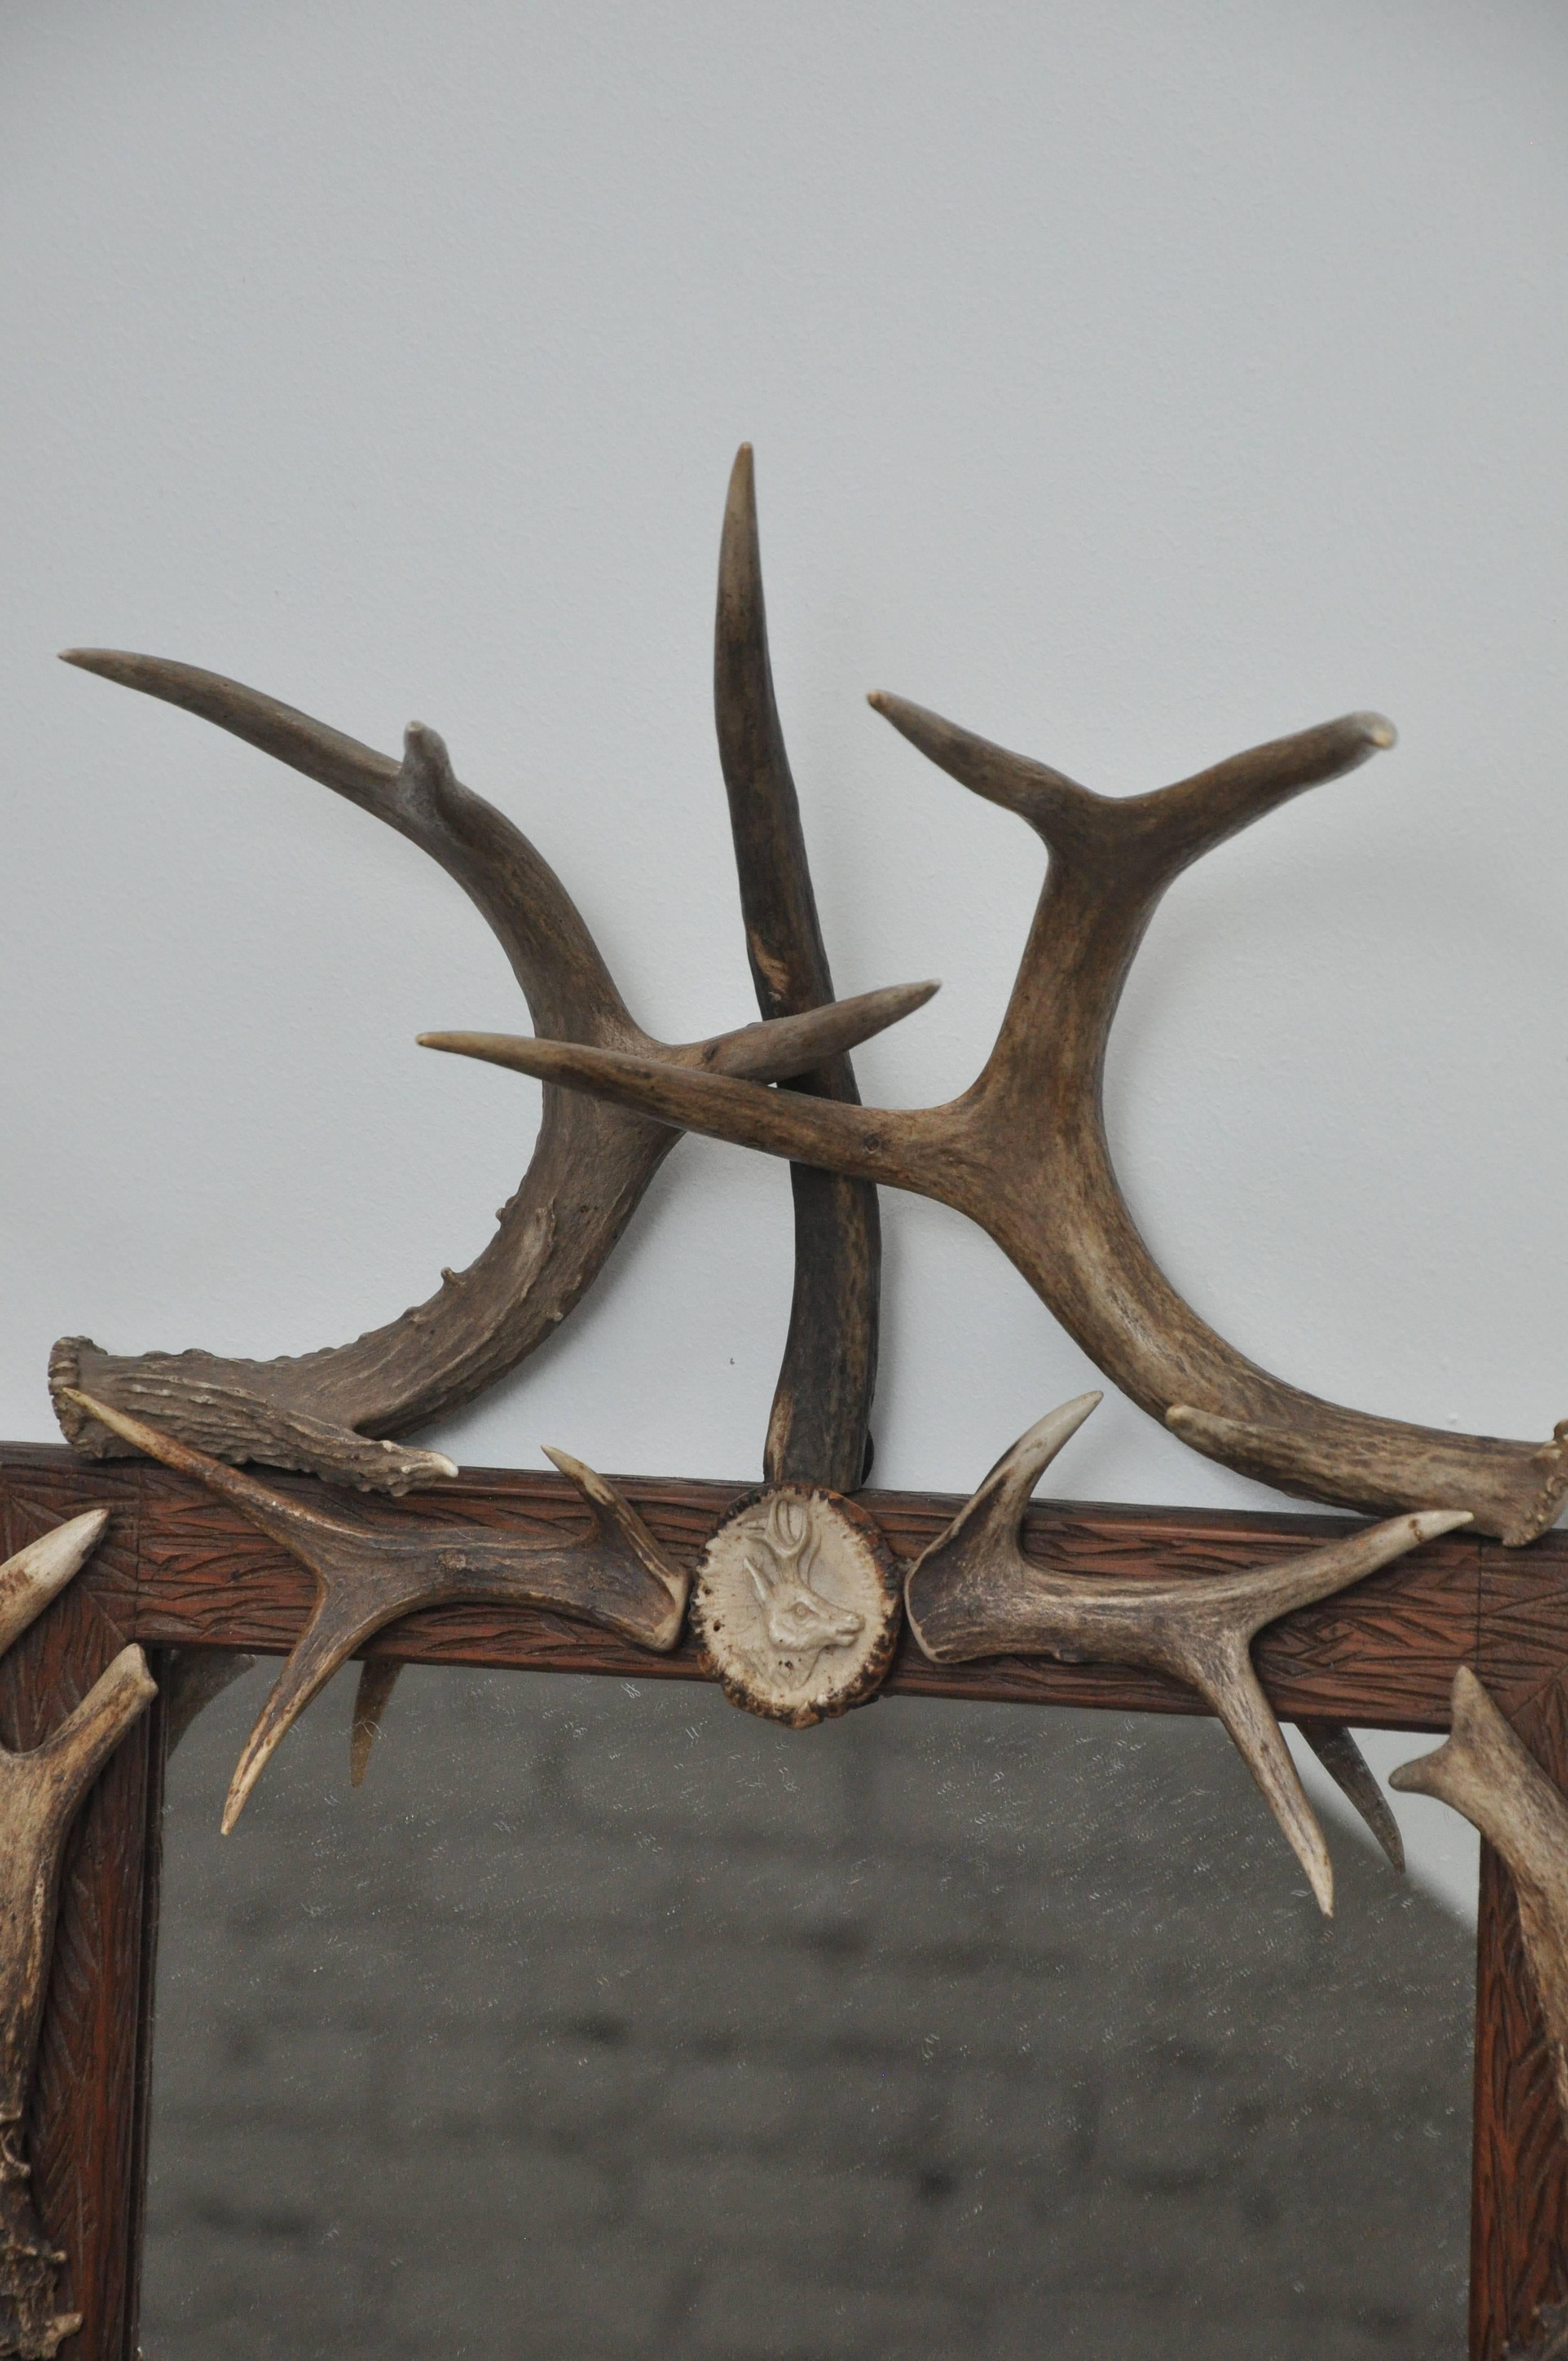 17th century pair of antler mirrors. Found in Bavarian Hunting Lodge. Handsome pair of antler mirrors in mint condition. Handmade, each unique in design.

Dimensions: 19